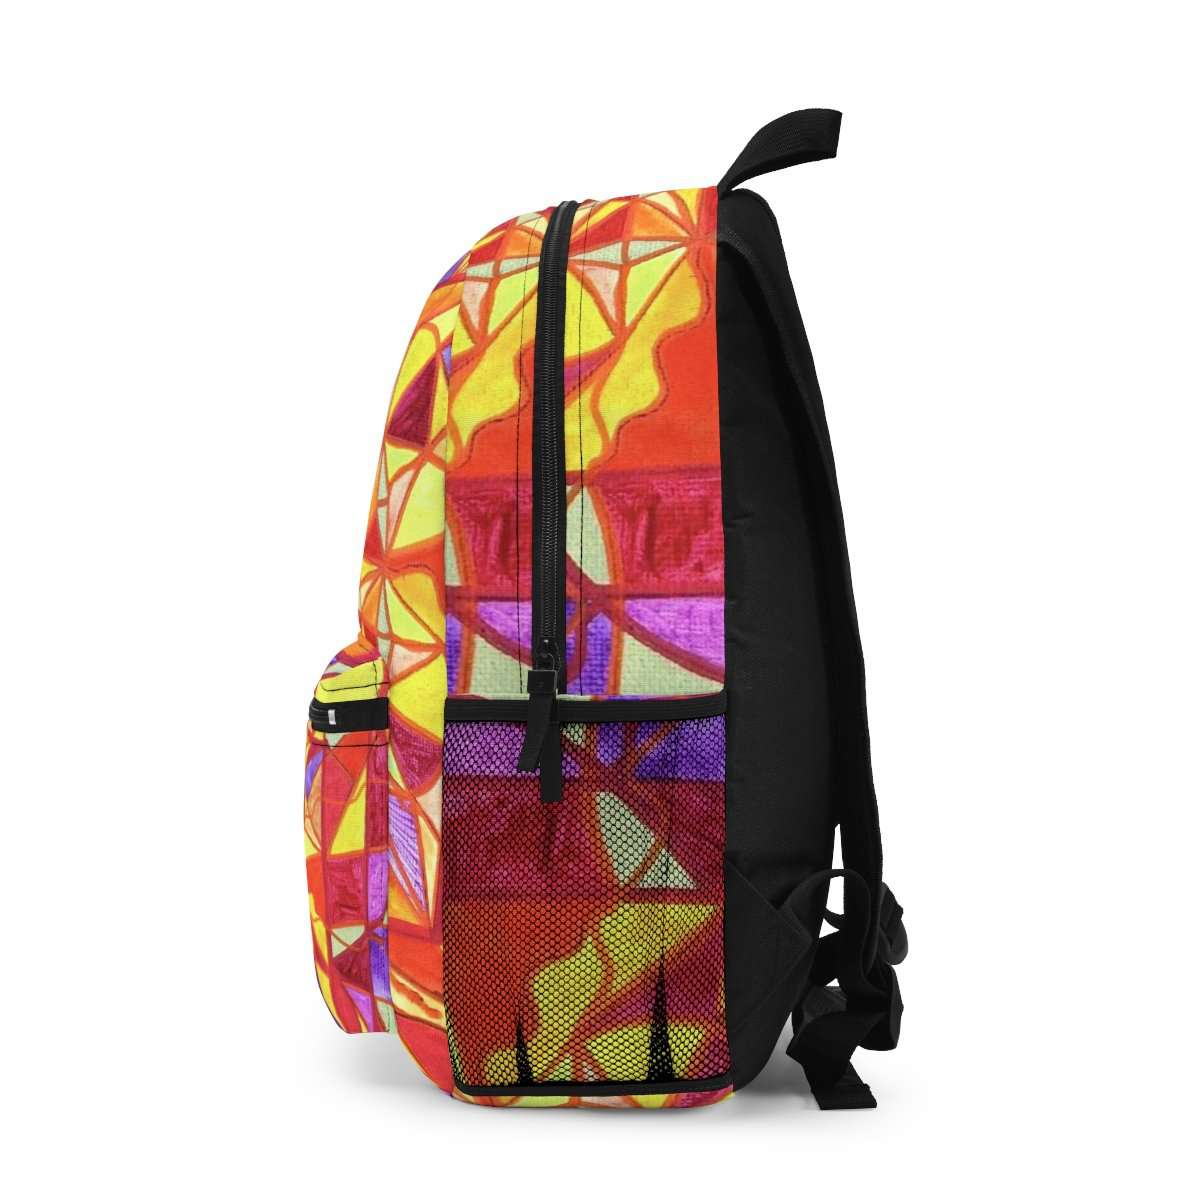 shop-online-and-get-your-favourite-ambition-aop-backpack-sale_2.jpg